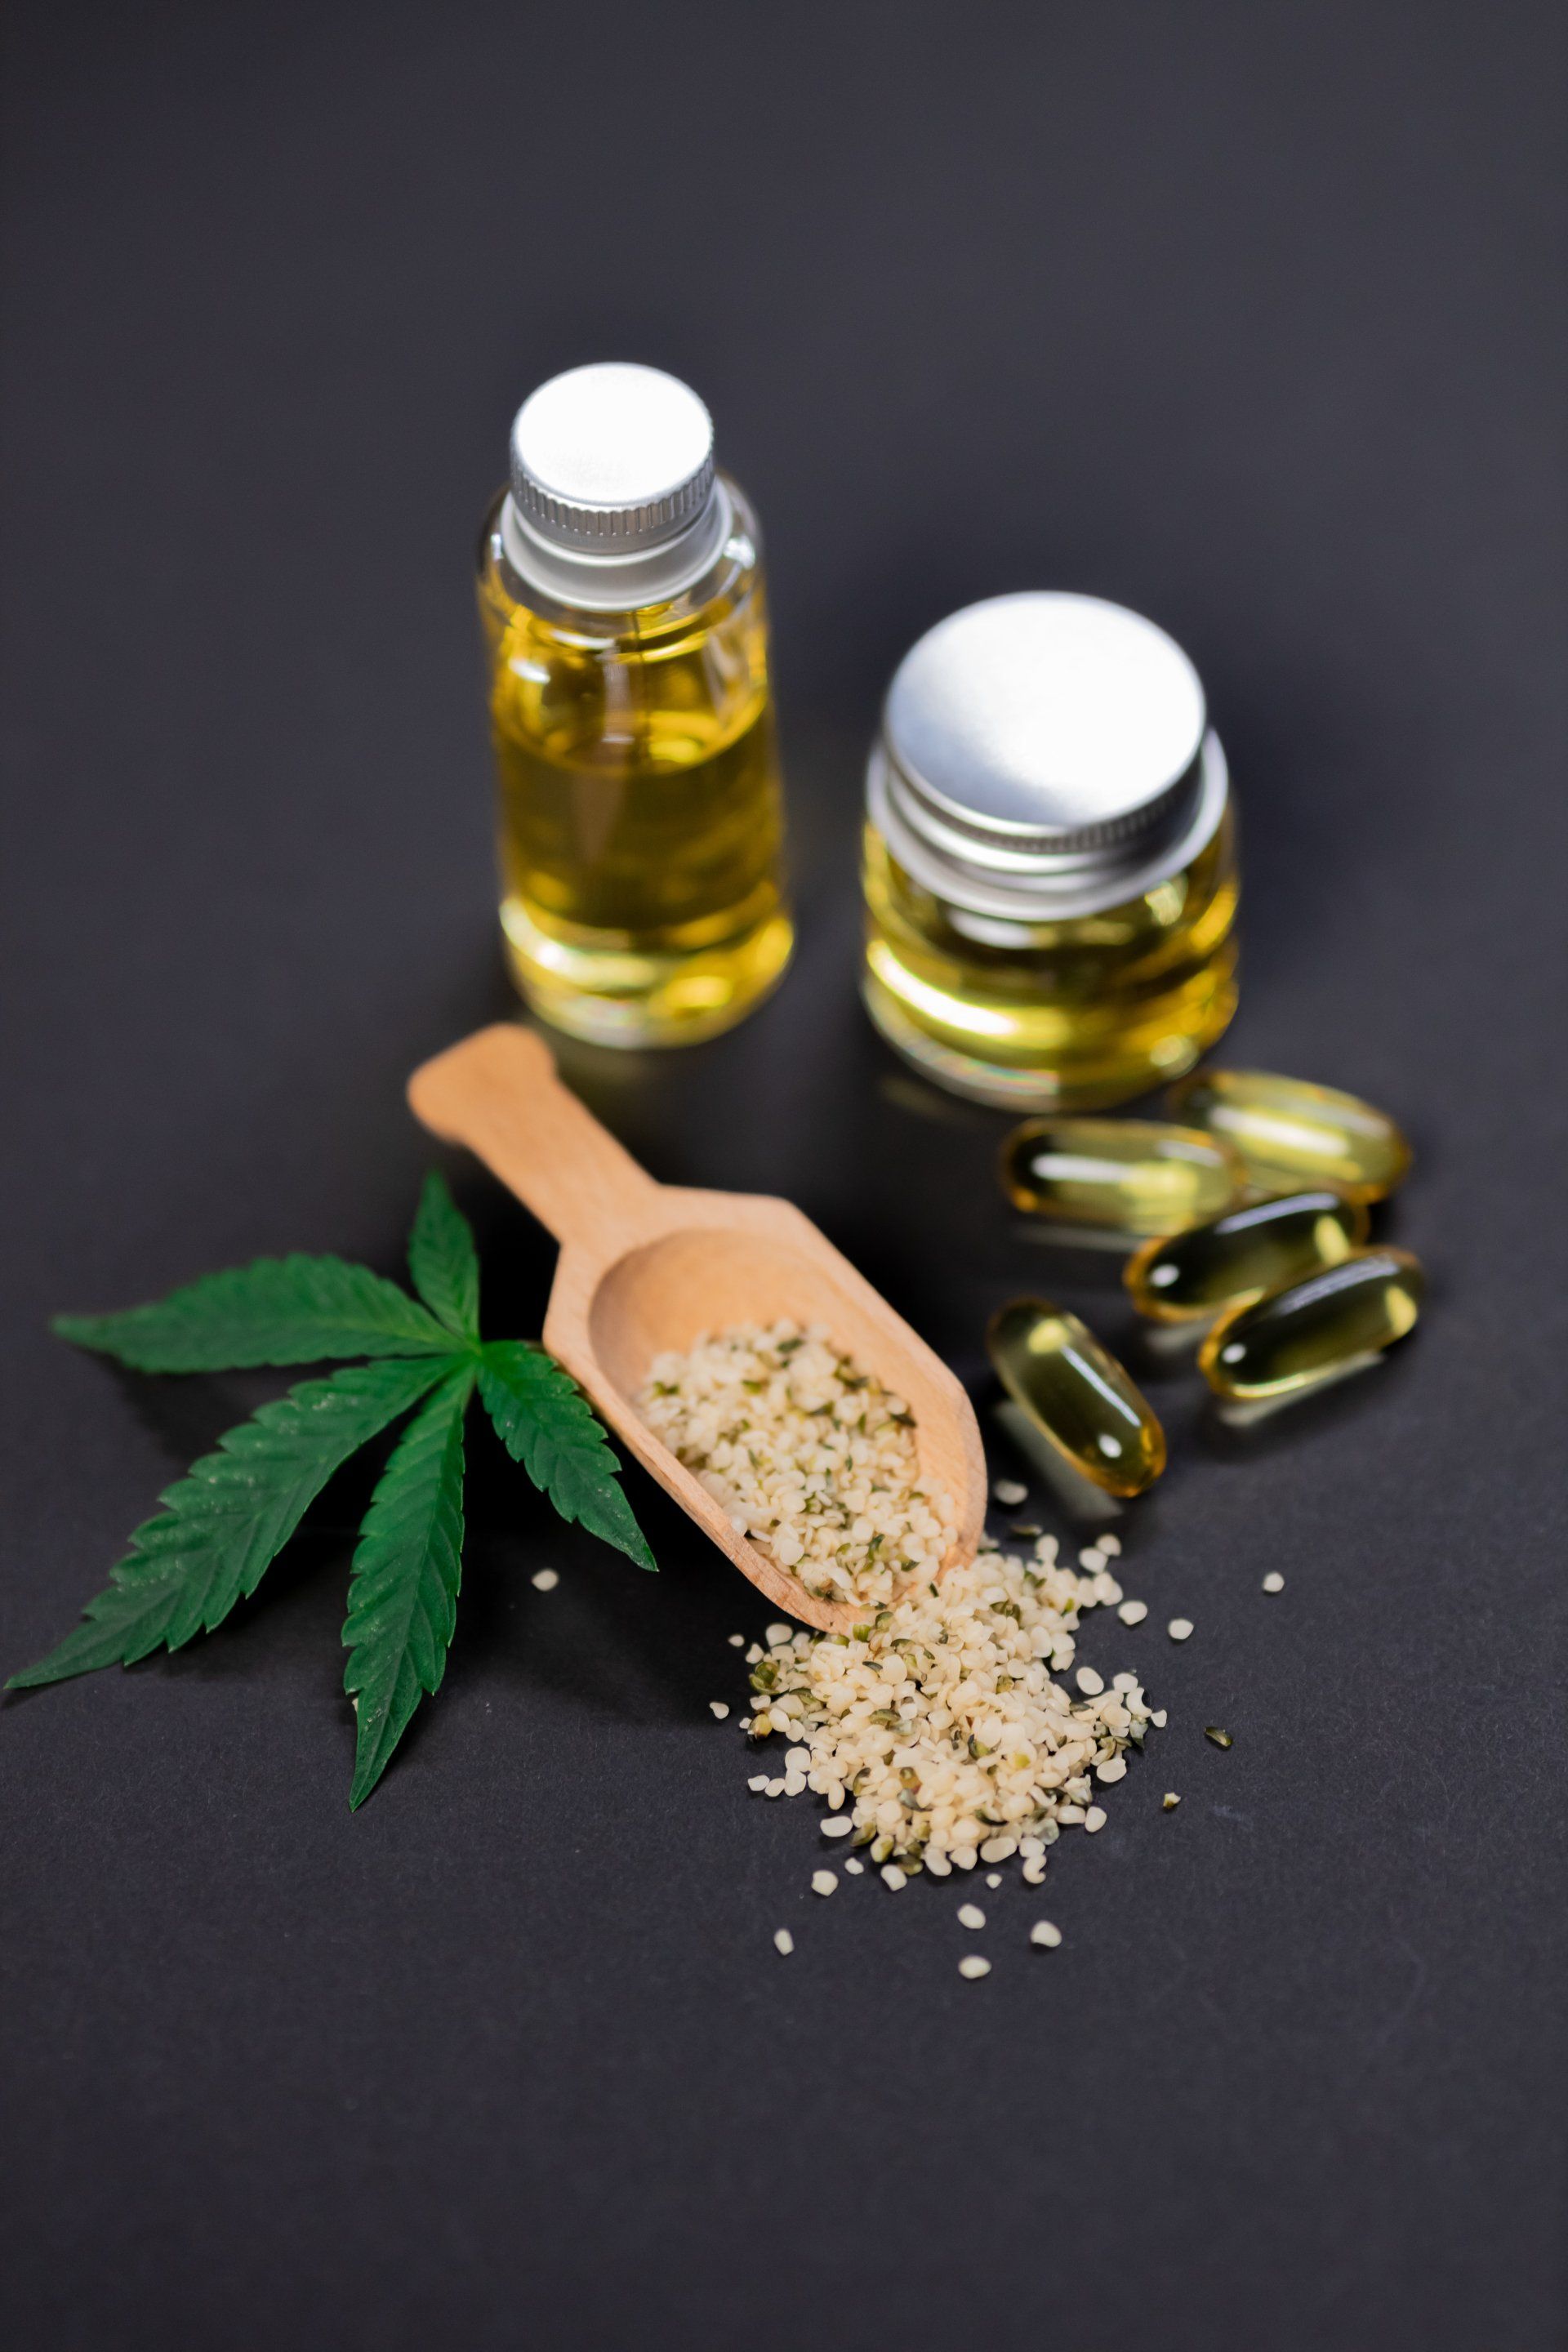 New products are constantly being developed from the cannabis plant, such as extracts and tinctures.